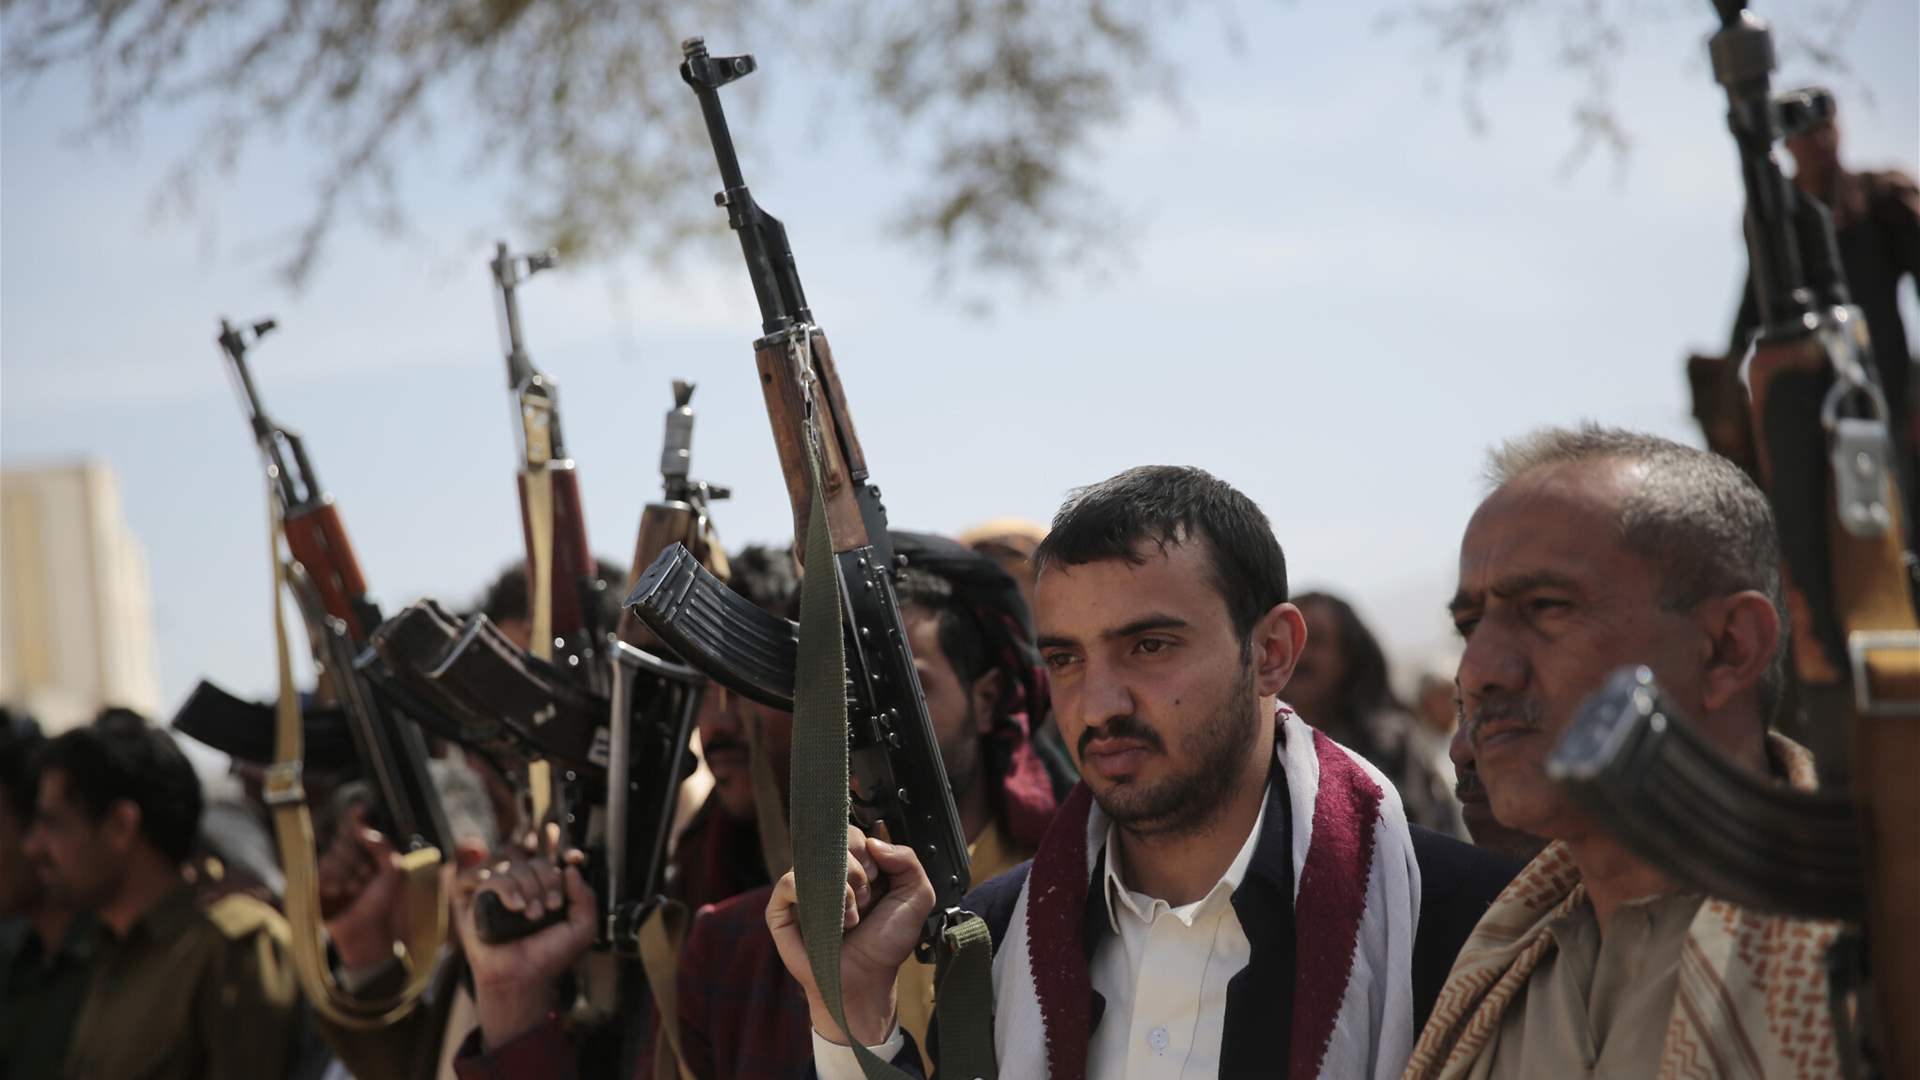 US imposes new sanctions related to Yemen targeting financial network of Houthis